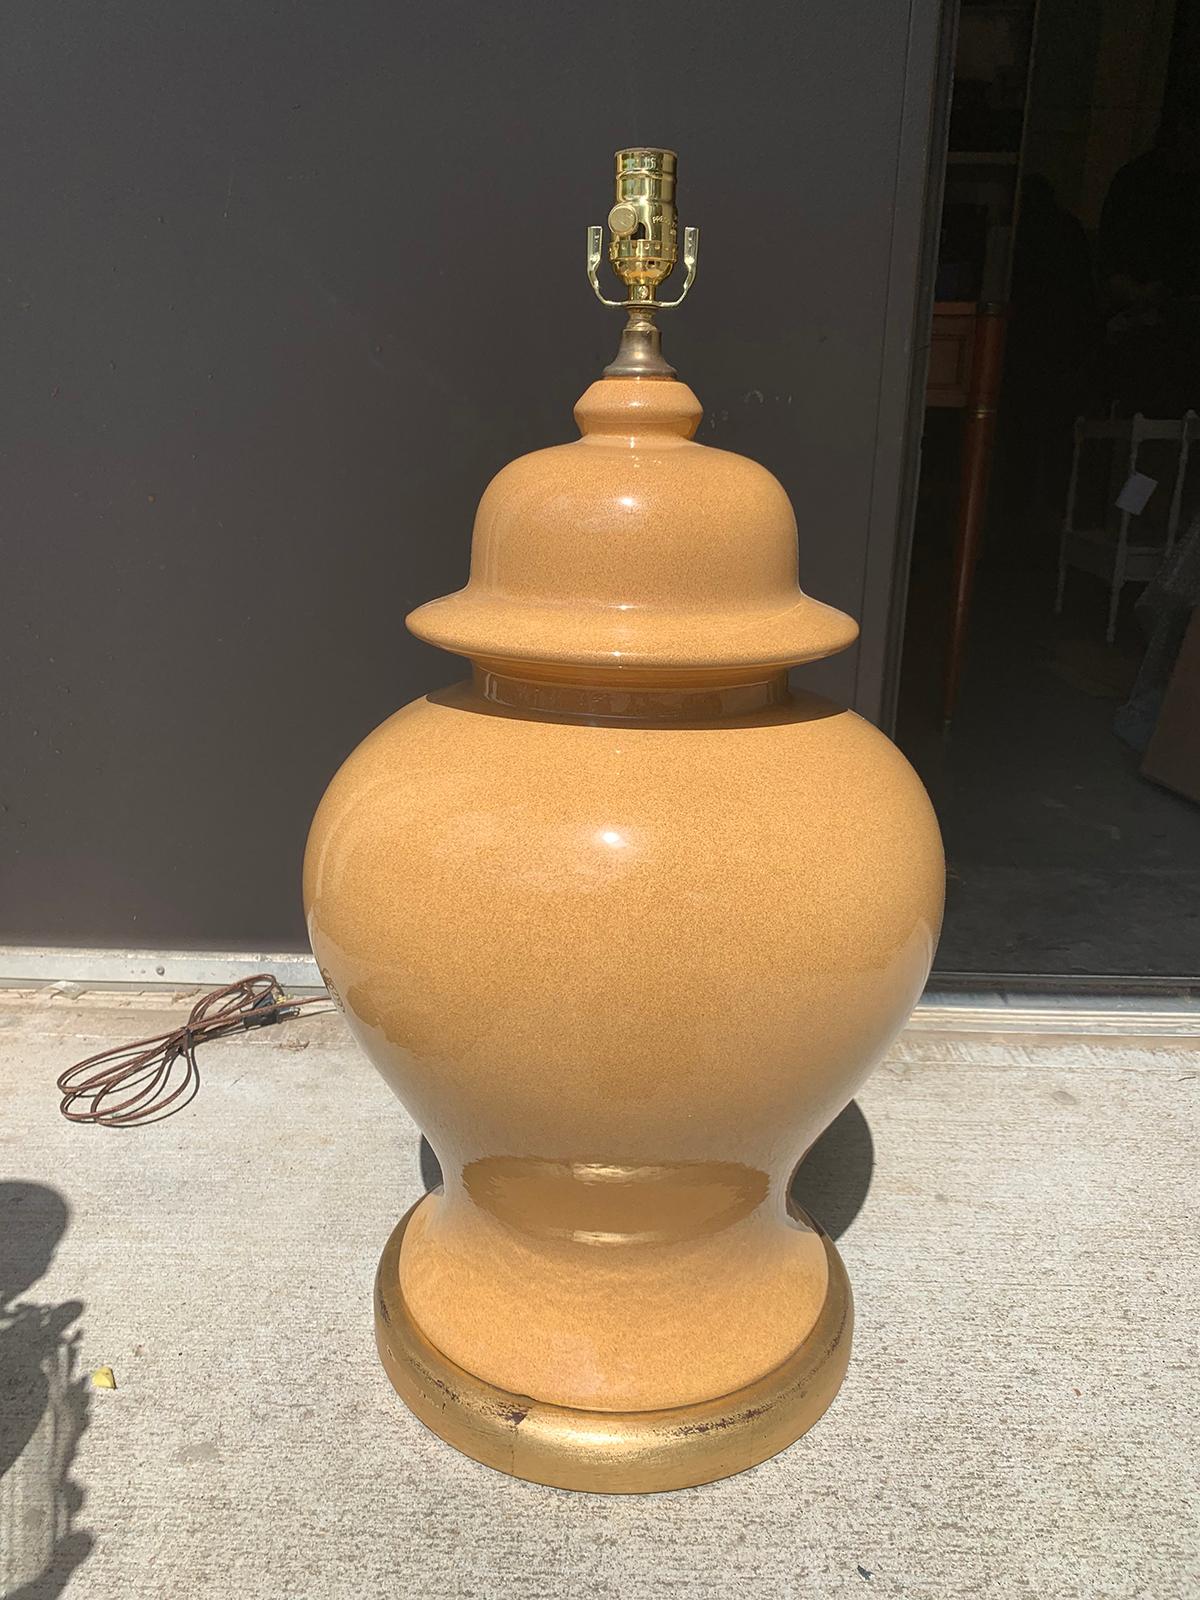 Mid-20th century large ginger jar as lamp, custom giltwood base
Mustard color
Brand new wiring
Measures: 14